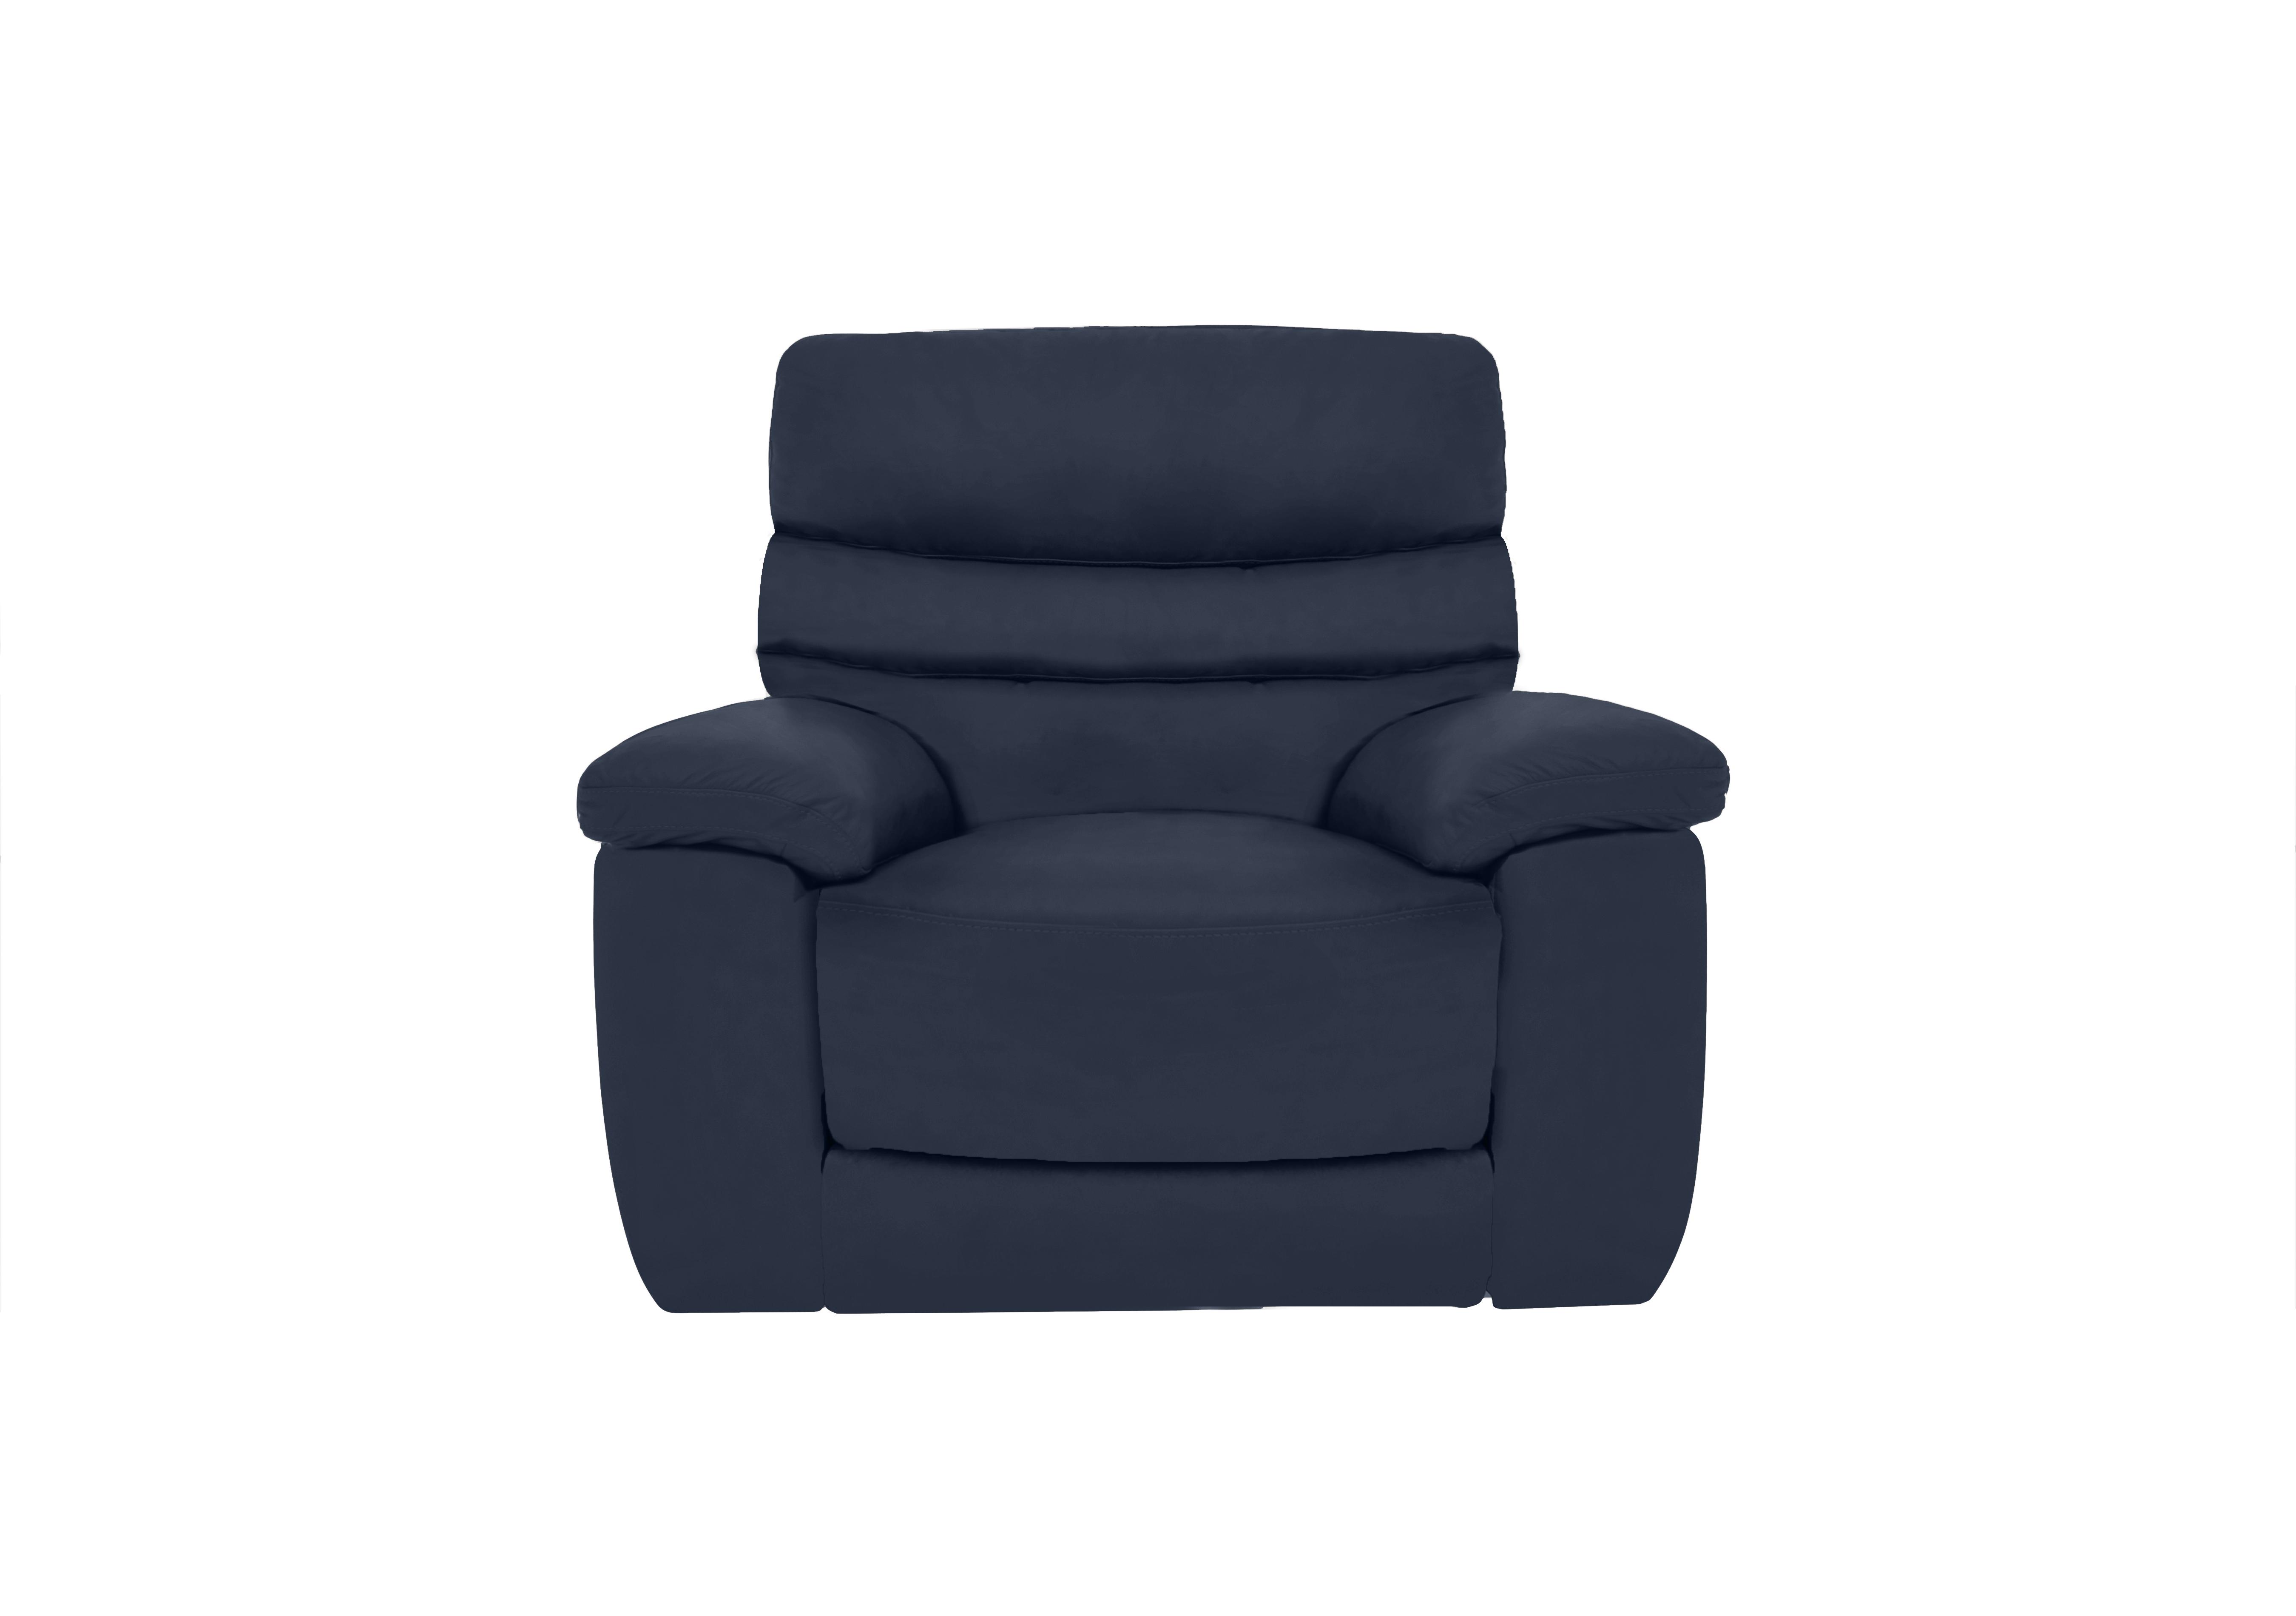 Nimbus Leather Power Recliner Chair with Power Headrest and Power Lumbar in Bx-036c Navy on Furniture Village